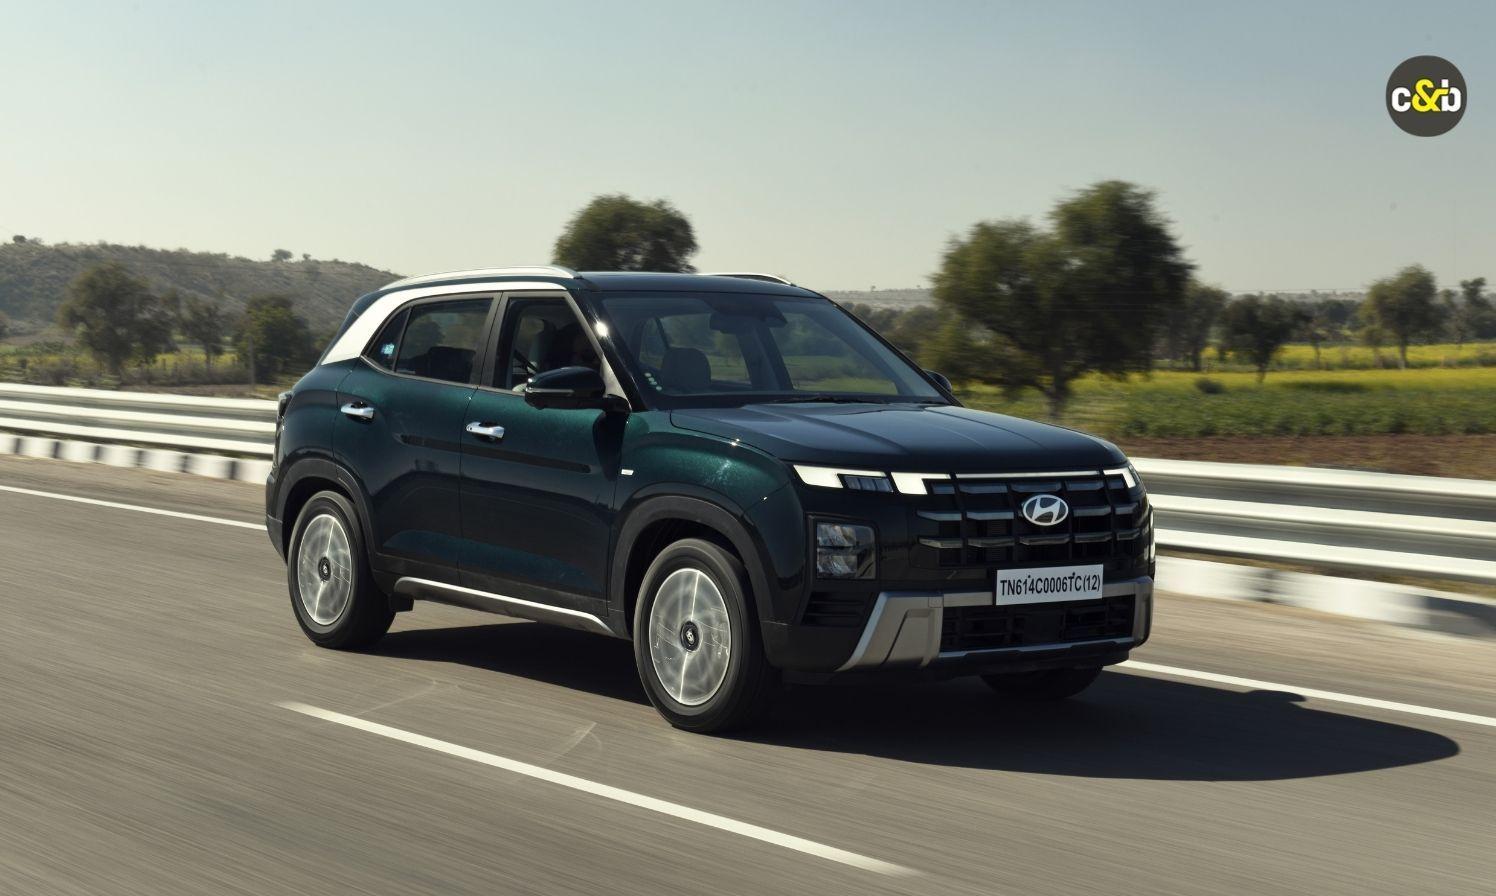 Launched in 2020, the second-generation Creta has now received an extensive midlife update in a bid to maintain its dominance in the compact SUV space.